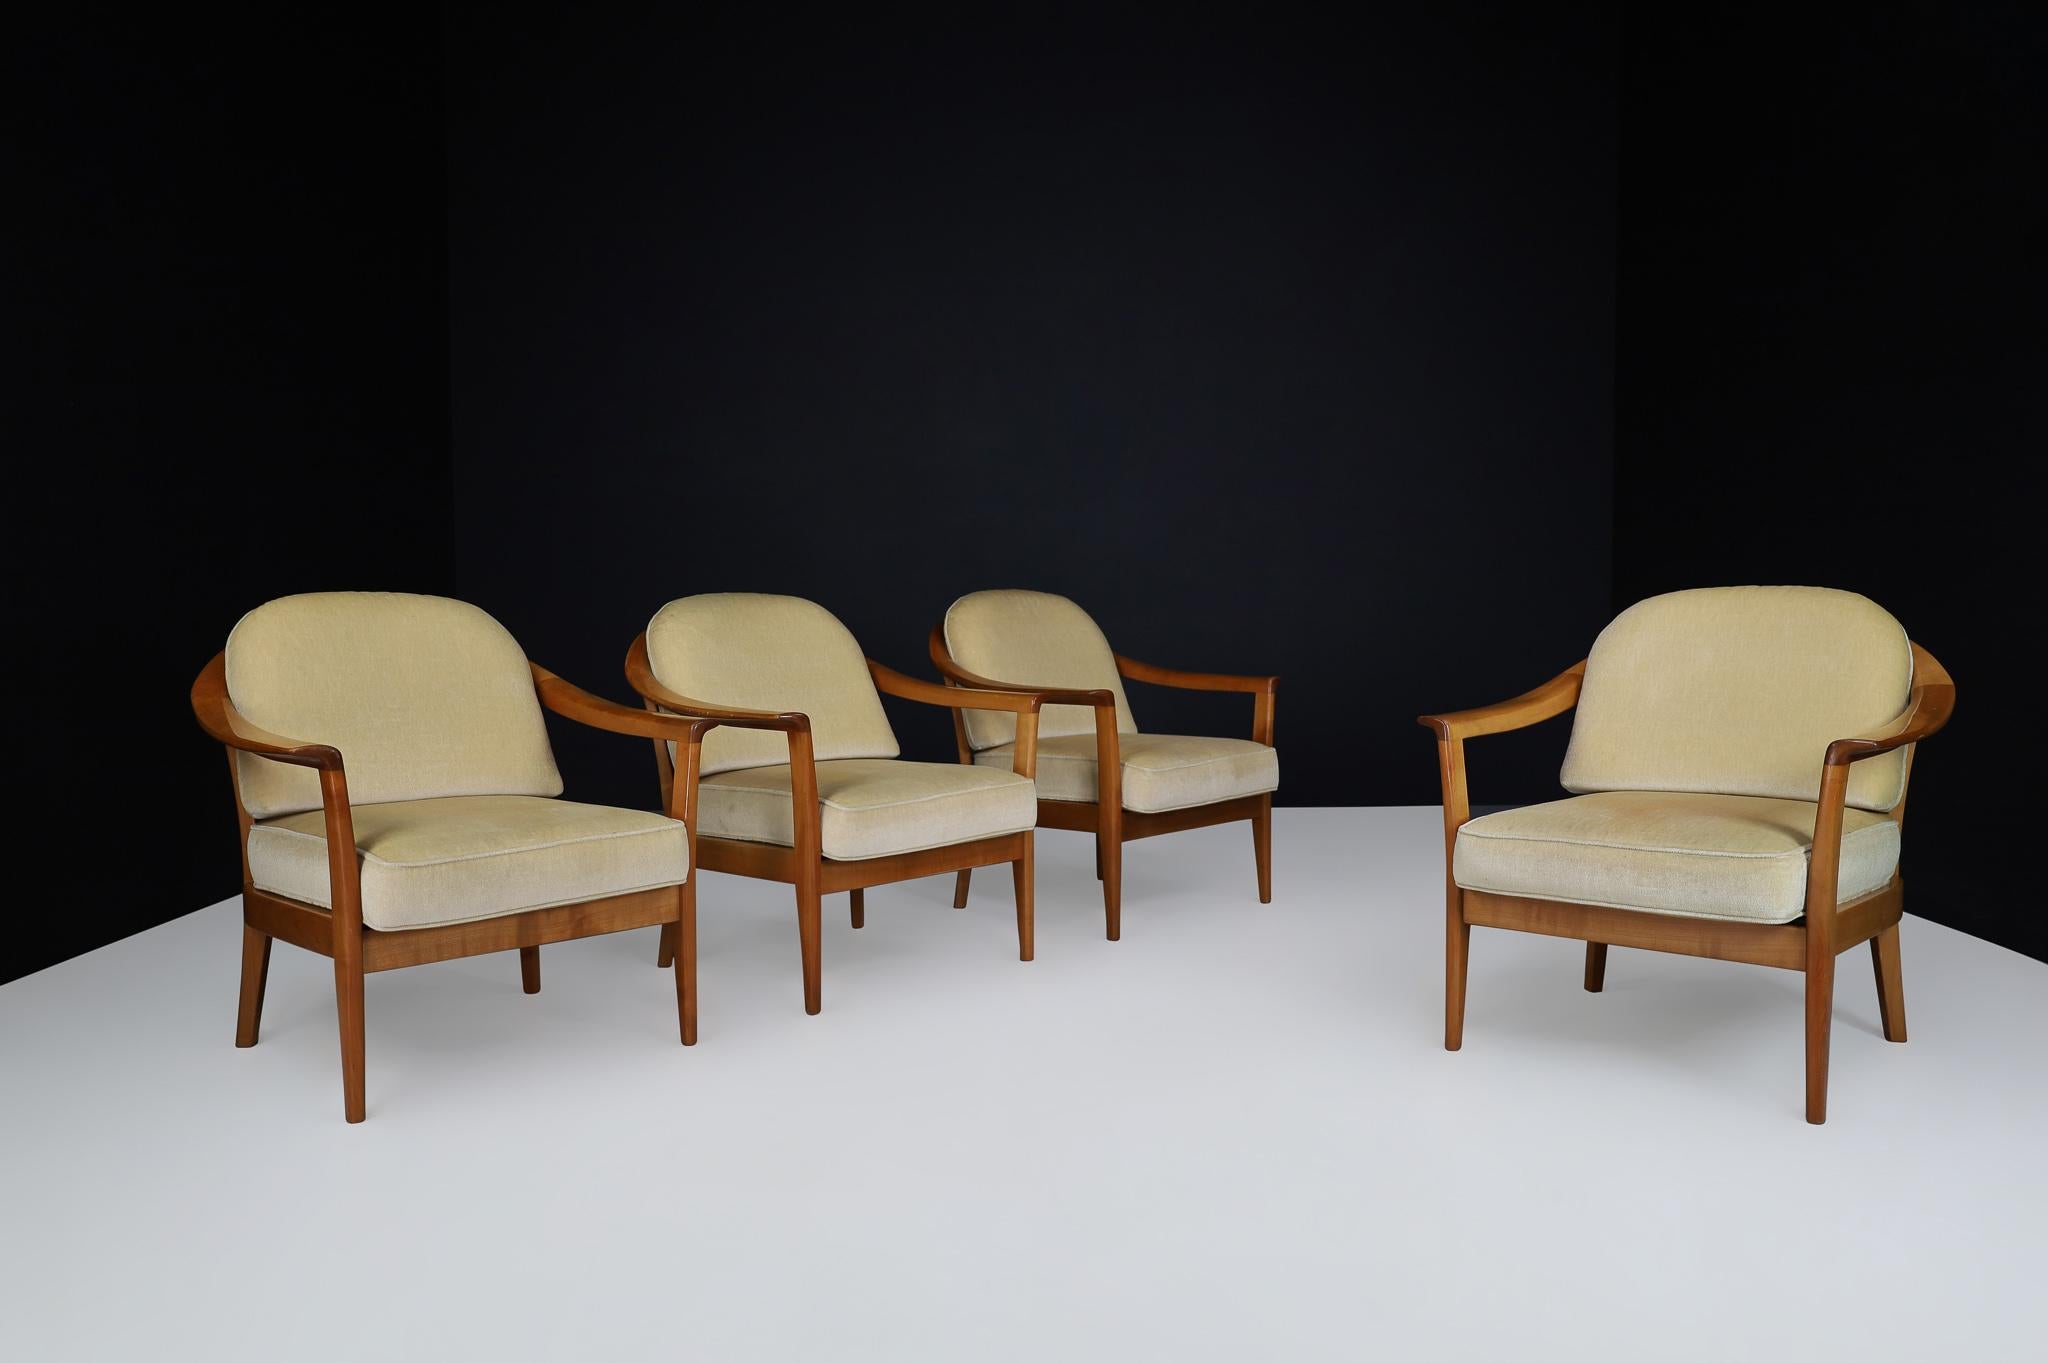 Mid-Century Modern easy chairs In Cherry By Wilhelm Knoll, Germany 1960s Mid-20th Century

A wonderful set of four easy chairs from the 1960s. High-quality, solid frame in brown stained cherry wood. The original fabric is a good vintage condition.